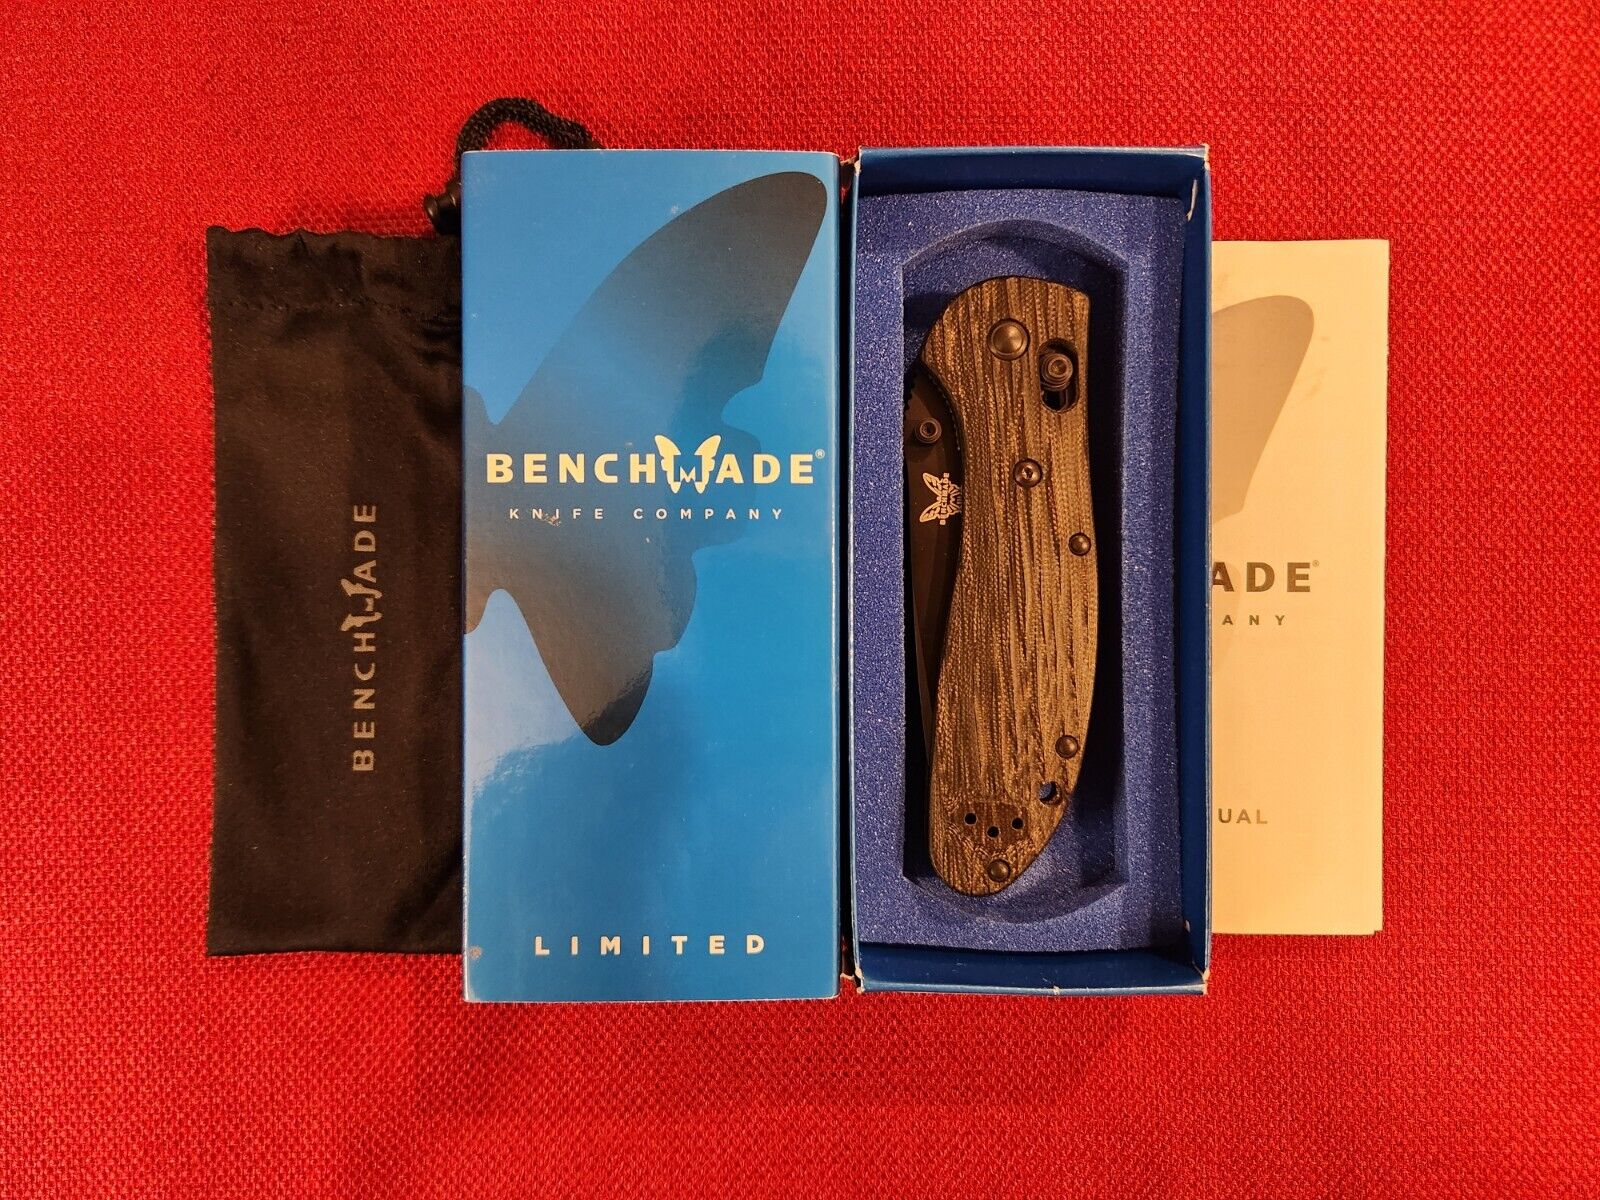 Benchmade 551SBK-1301 Limited Edition Griptilian M4 G10 2013 SHOT Show Exclusive